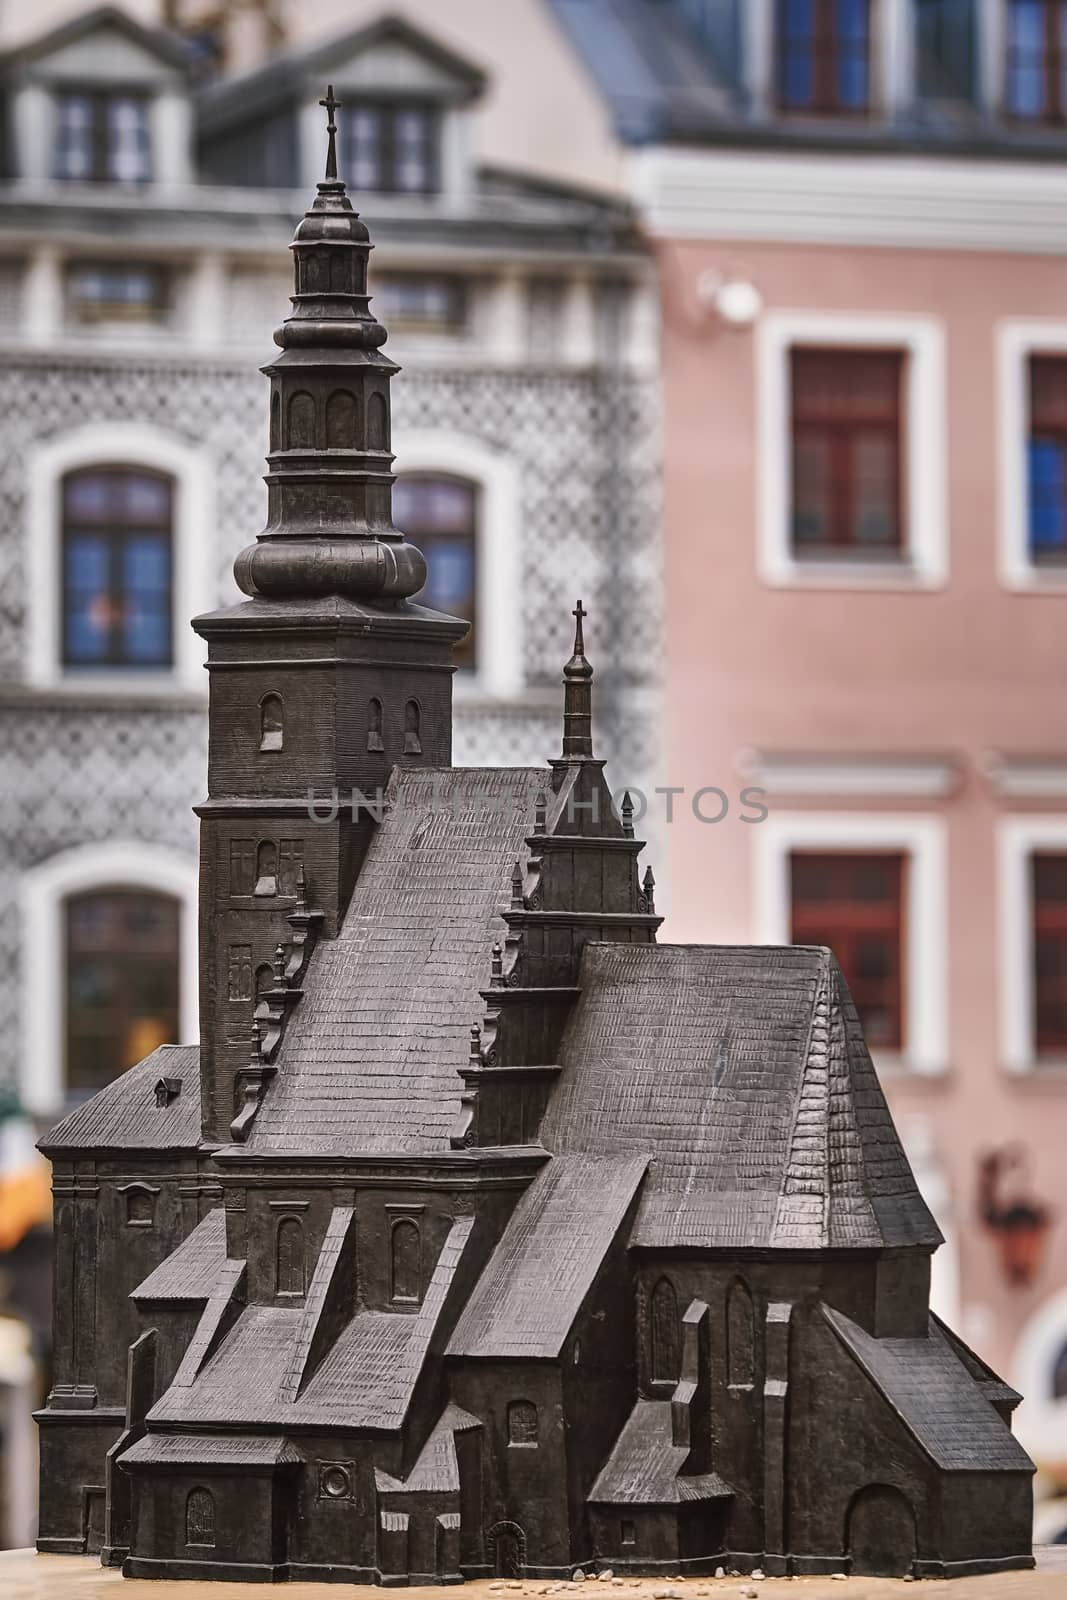 Model of destroyed Parish Church in Lublin, Poland